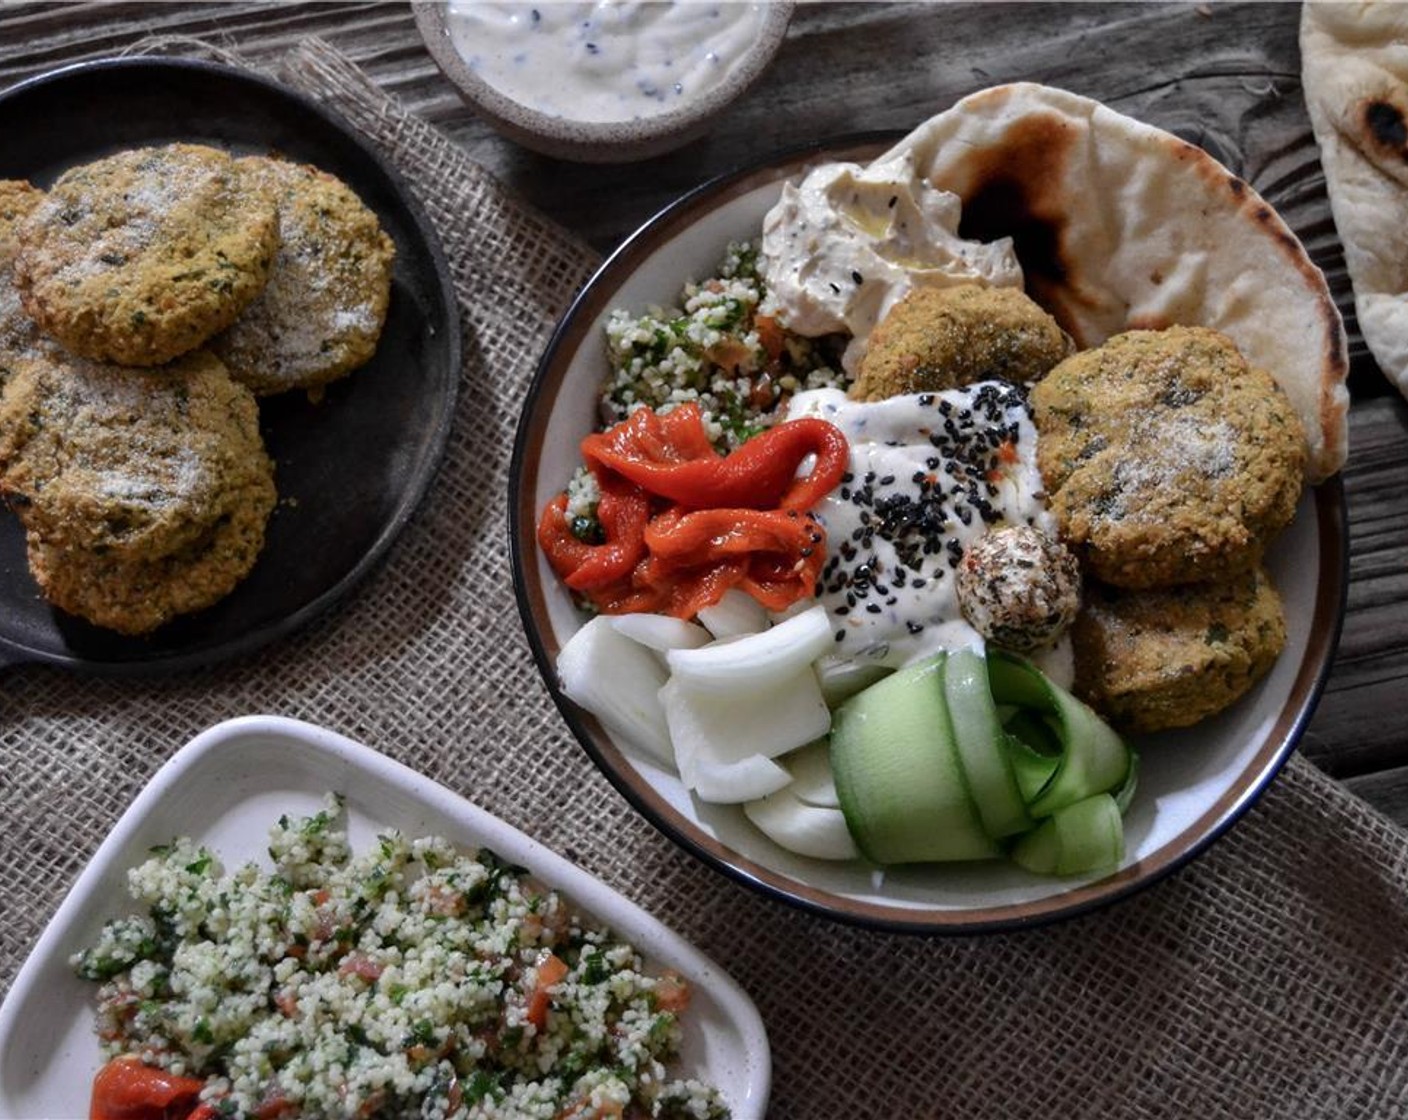 step 6 In a bowl, arrange the Tabouleh (to taste), along with Pickled Peppers (to taste), Fresh Herbs (to taste), cucumber ribbons, Onion (1), Labneh Cheese (to taste), and Flatbread (to taste) around a few of the falafels. Top with a dollop of Hummus (to taste).